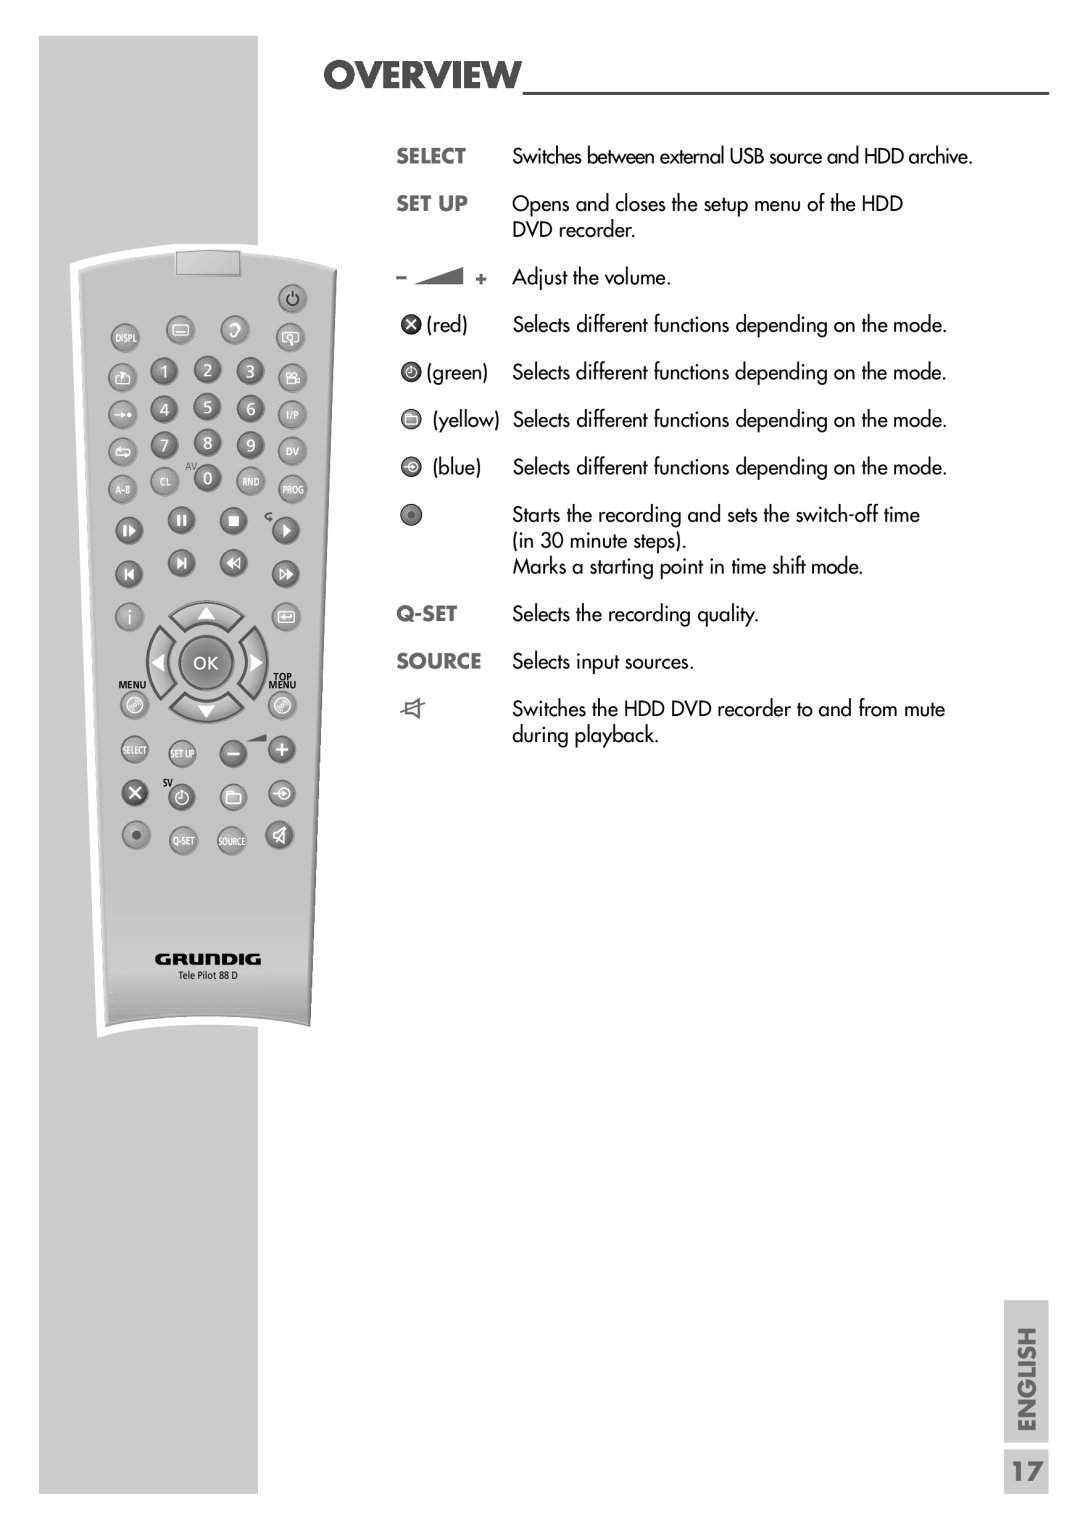 Grundig 5550 HDD Overview, English, Select, Set Up, Q-Set, Source, Switches between external USB source and HDD archive 